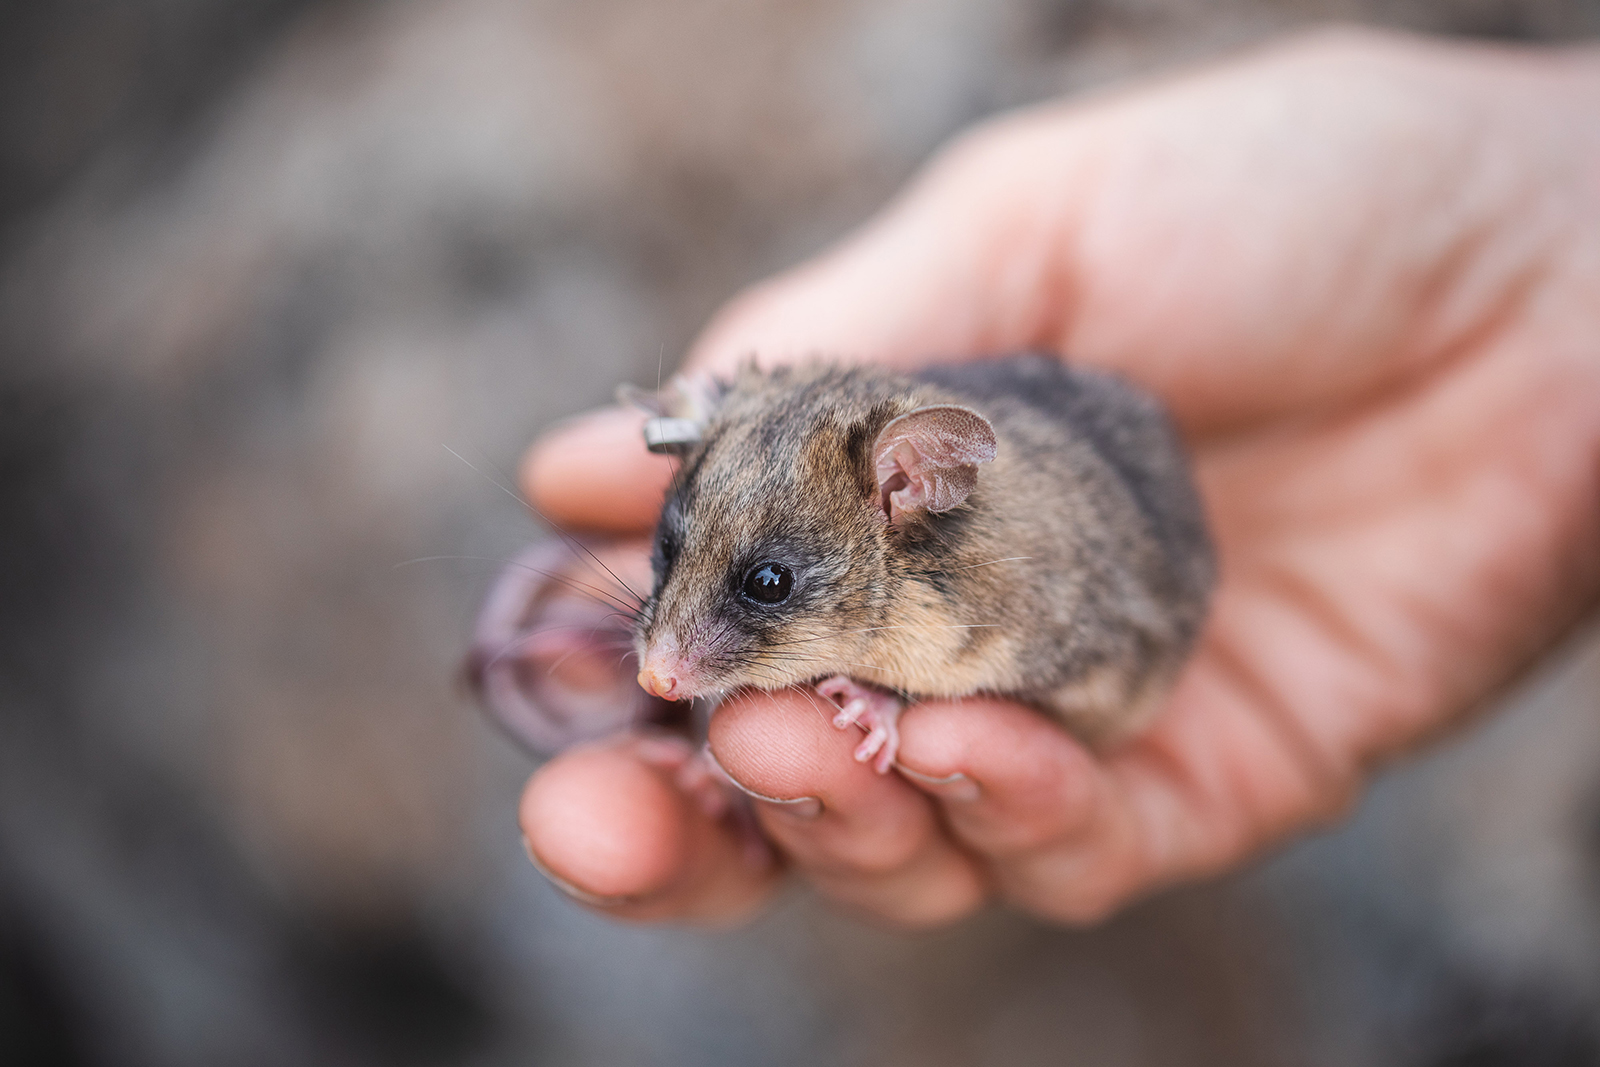 A mountain pygmy-possum in Dr Linda Broome's hand. Photo: Alex Pike/DPIE